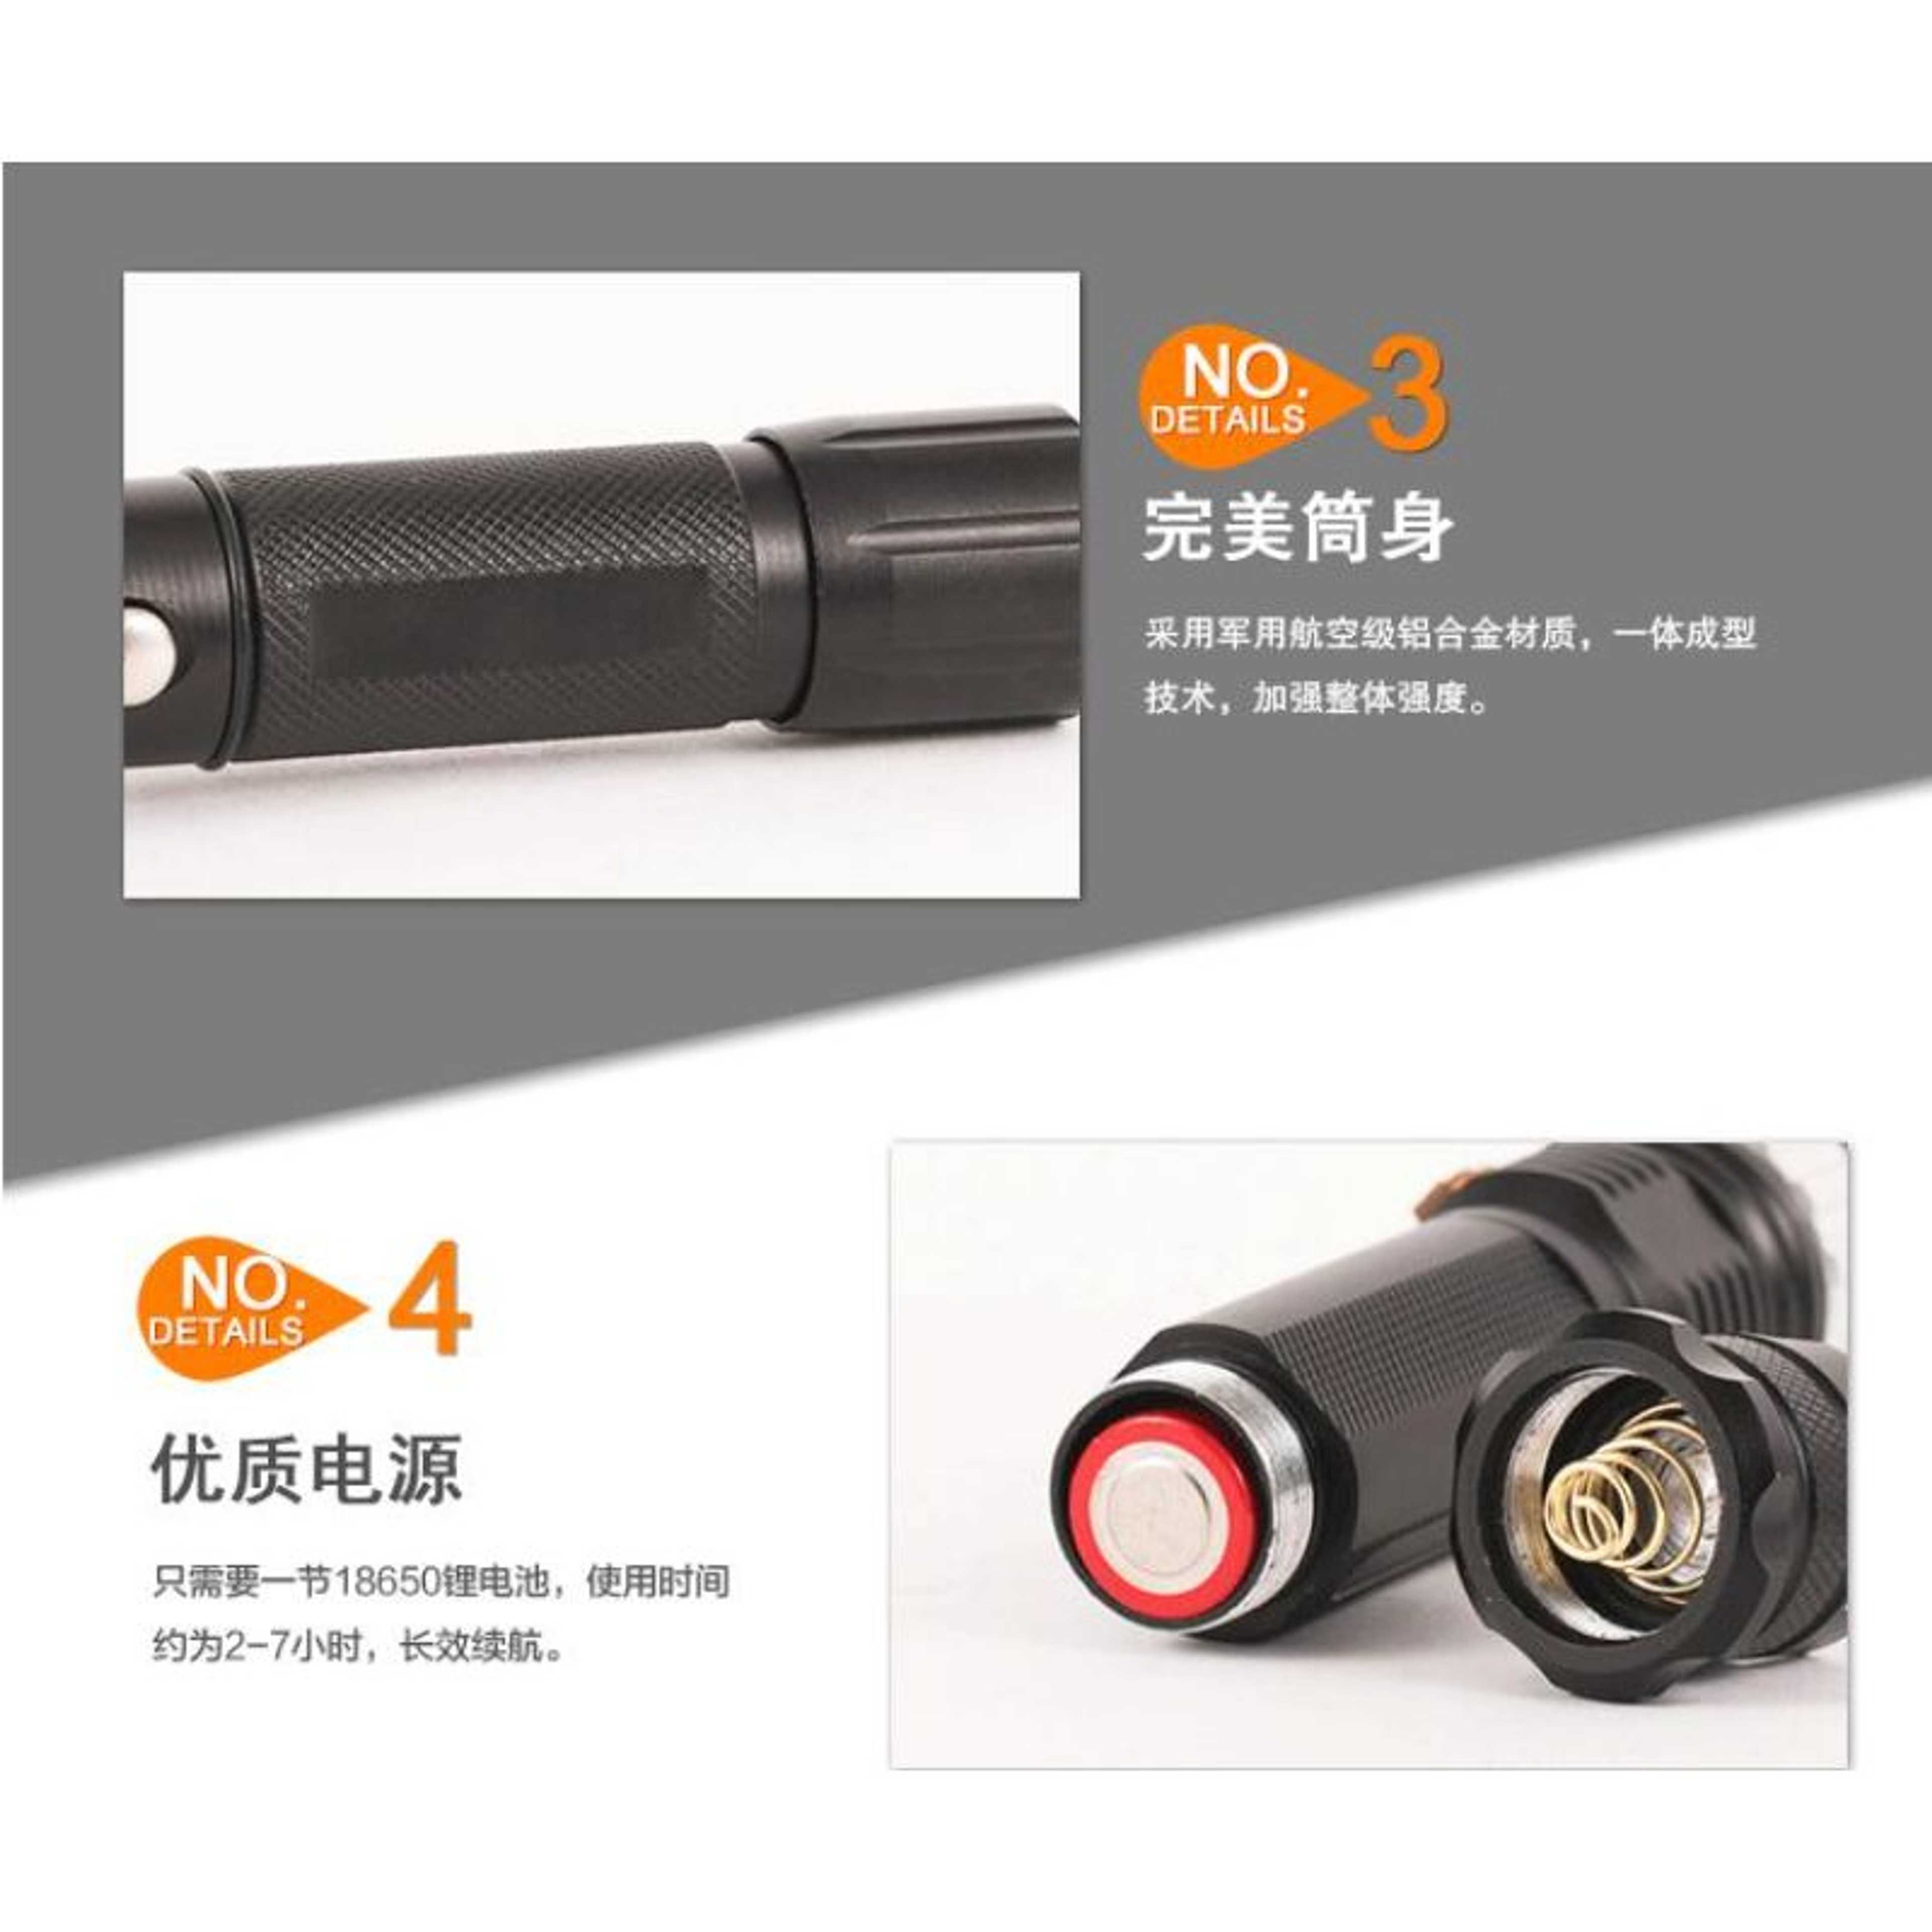 High Quality Led Flashlight Hard Light And Can Direct Charging Car Charging